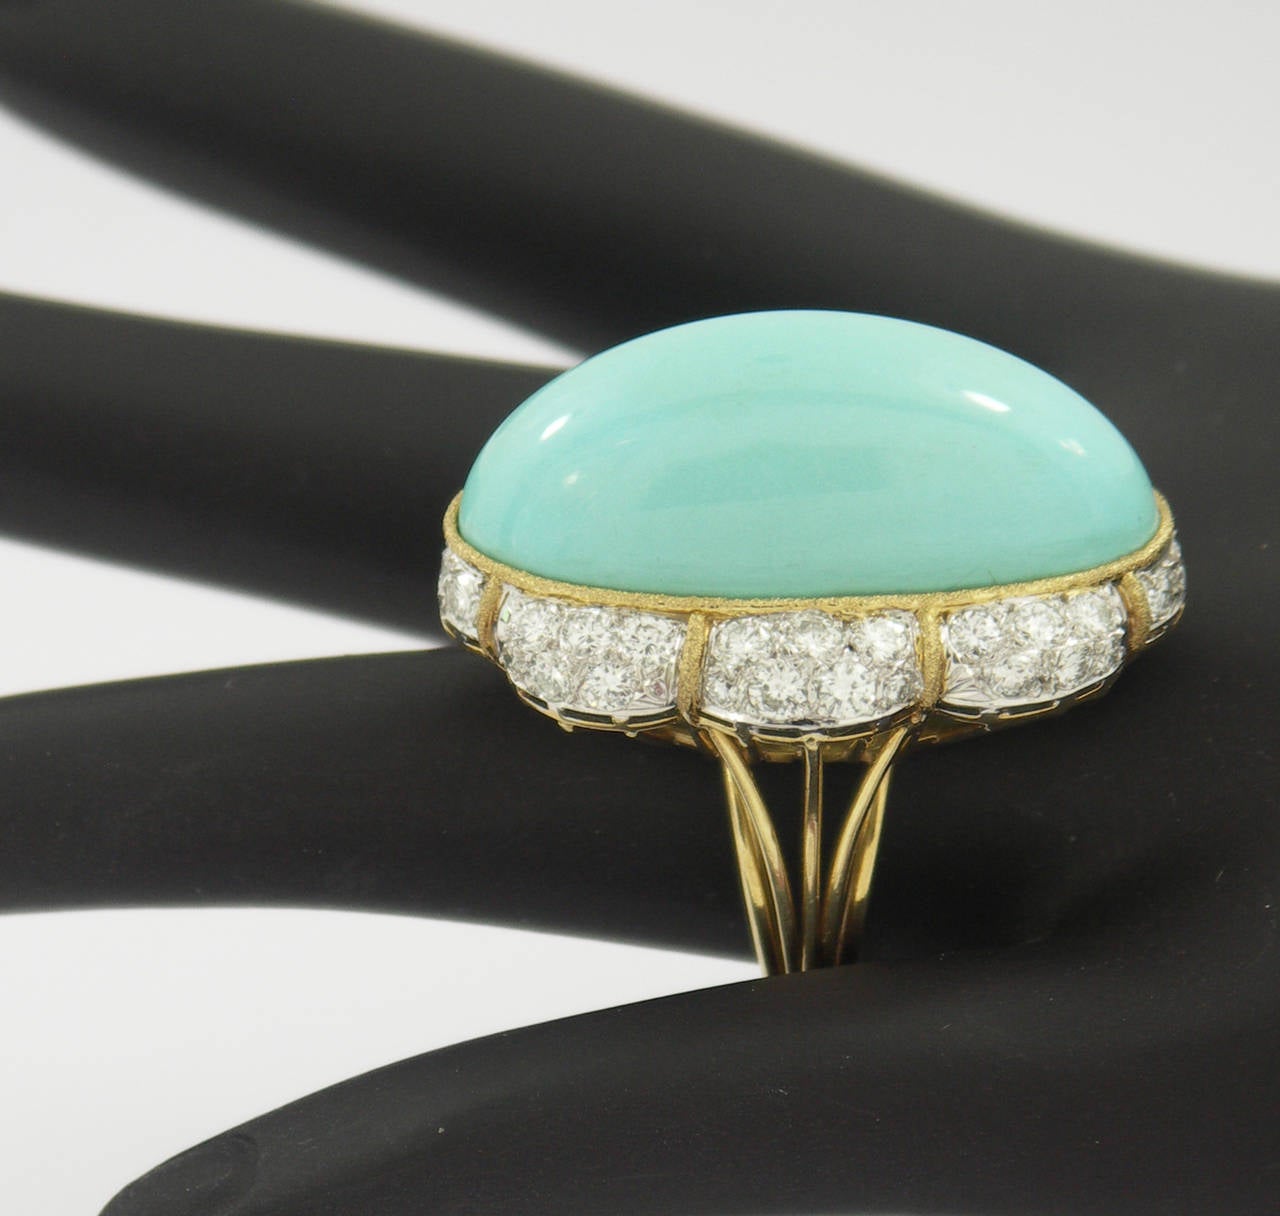 One ladies 18K yellow gold cocktail ring measuring approximately 0.88 inches long by 1 inch wide. This sleek and slender ring is set with a cabochon turquoise measuring 40mm long and 16mm wide. Surrounding the turquoise are 48 round brilliant cut